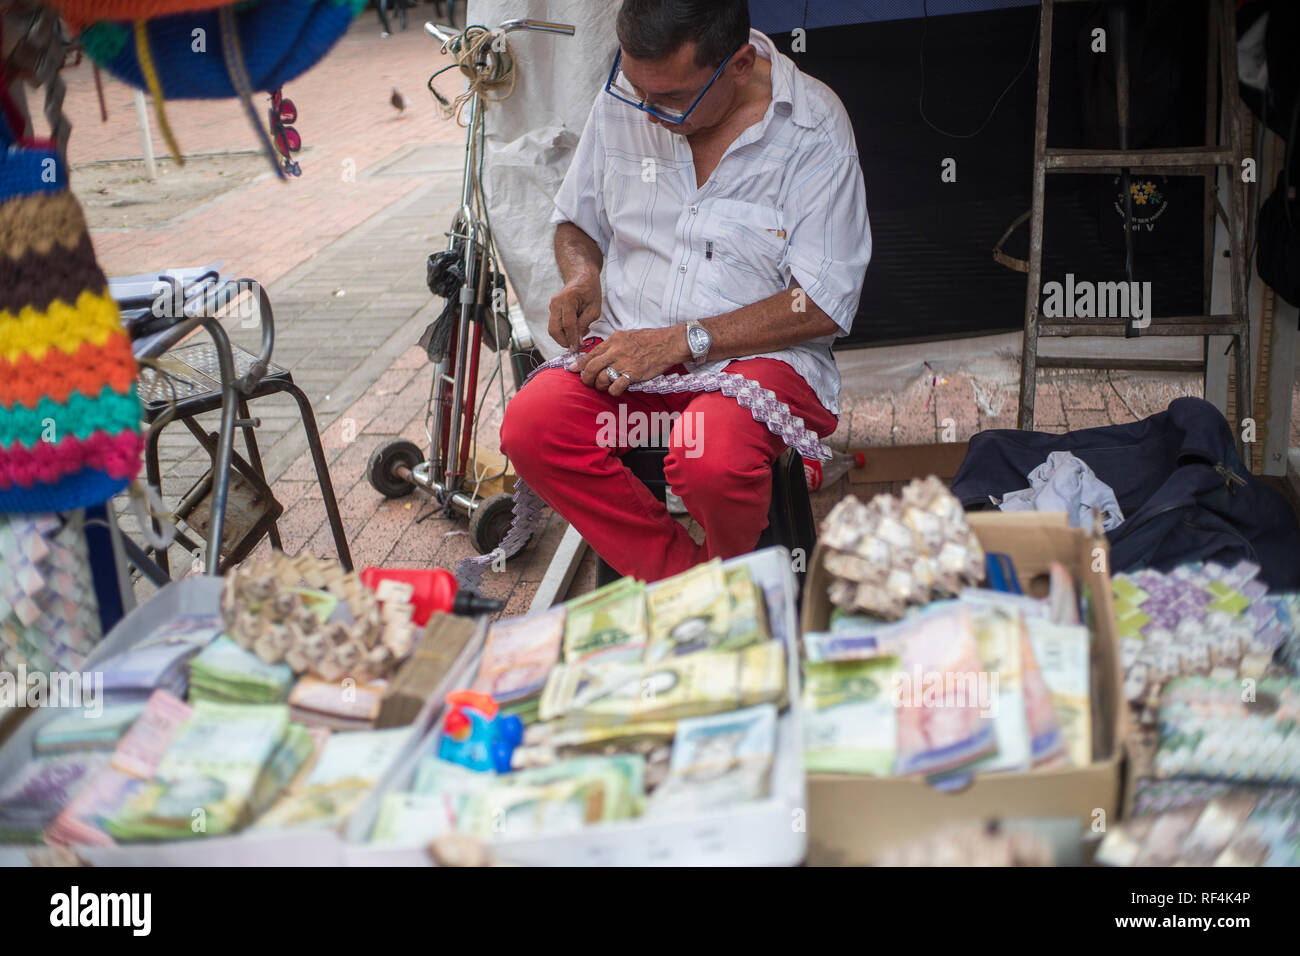 Figures or crafts made with Bolivarian tickets made by Venezuelan immigrants in the border city of Cúcuta Stock Photo